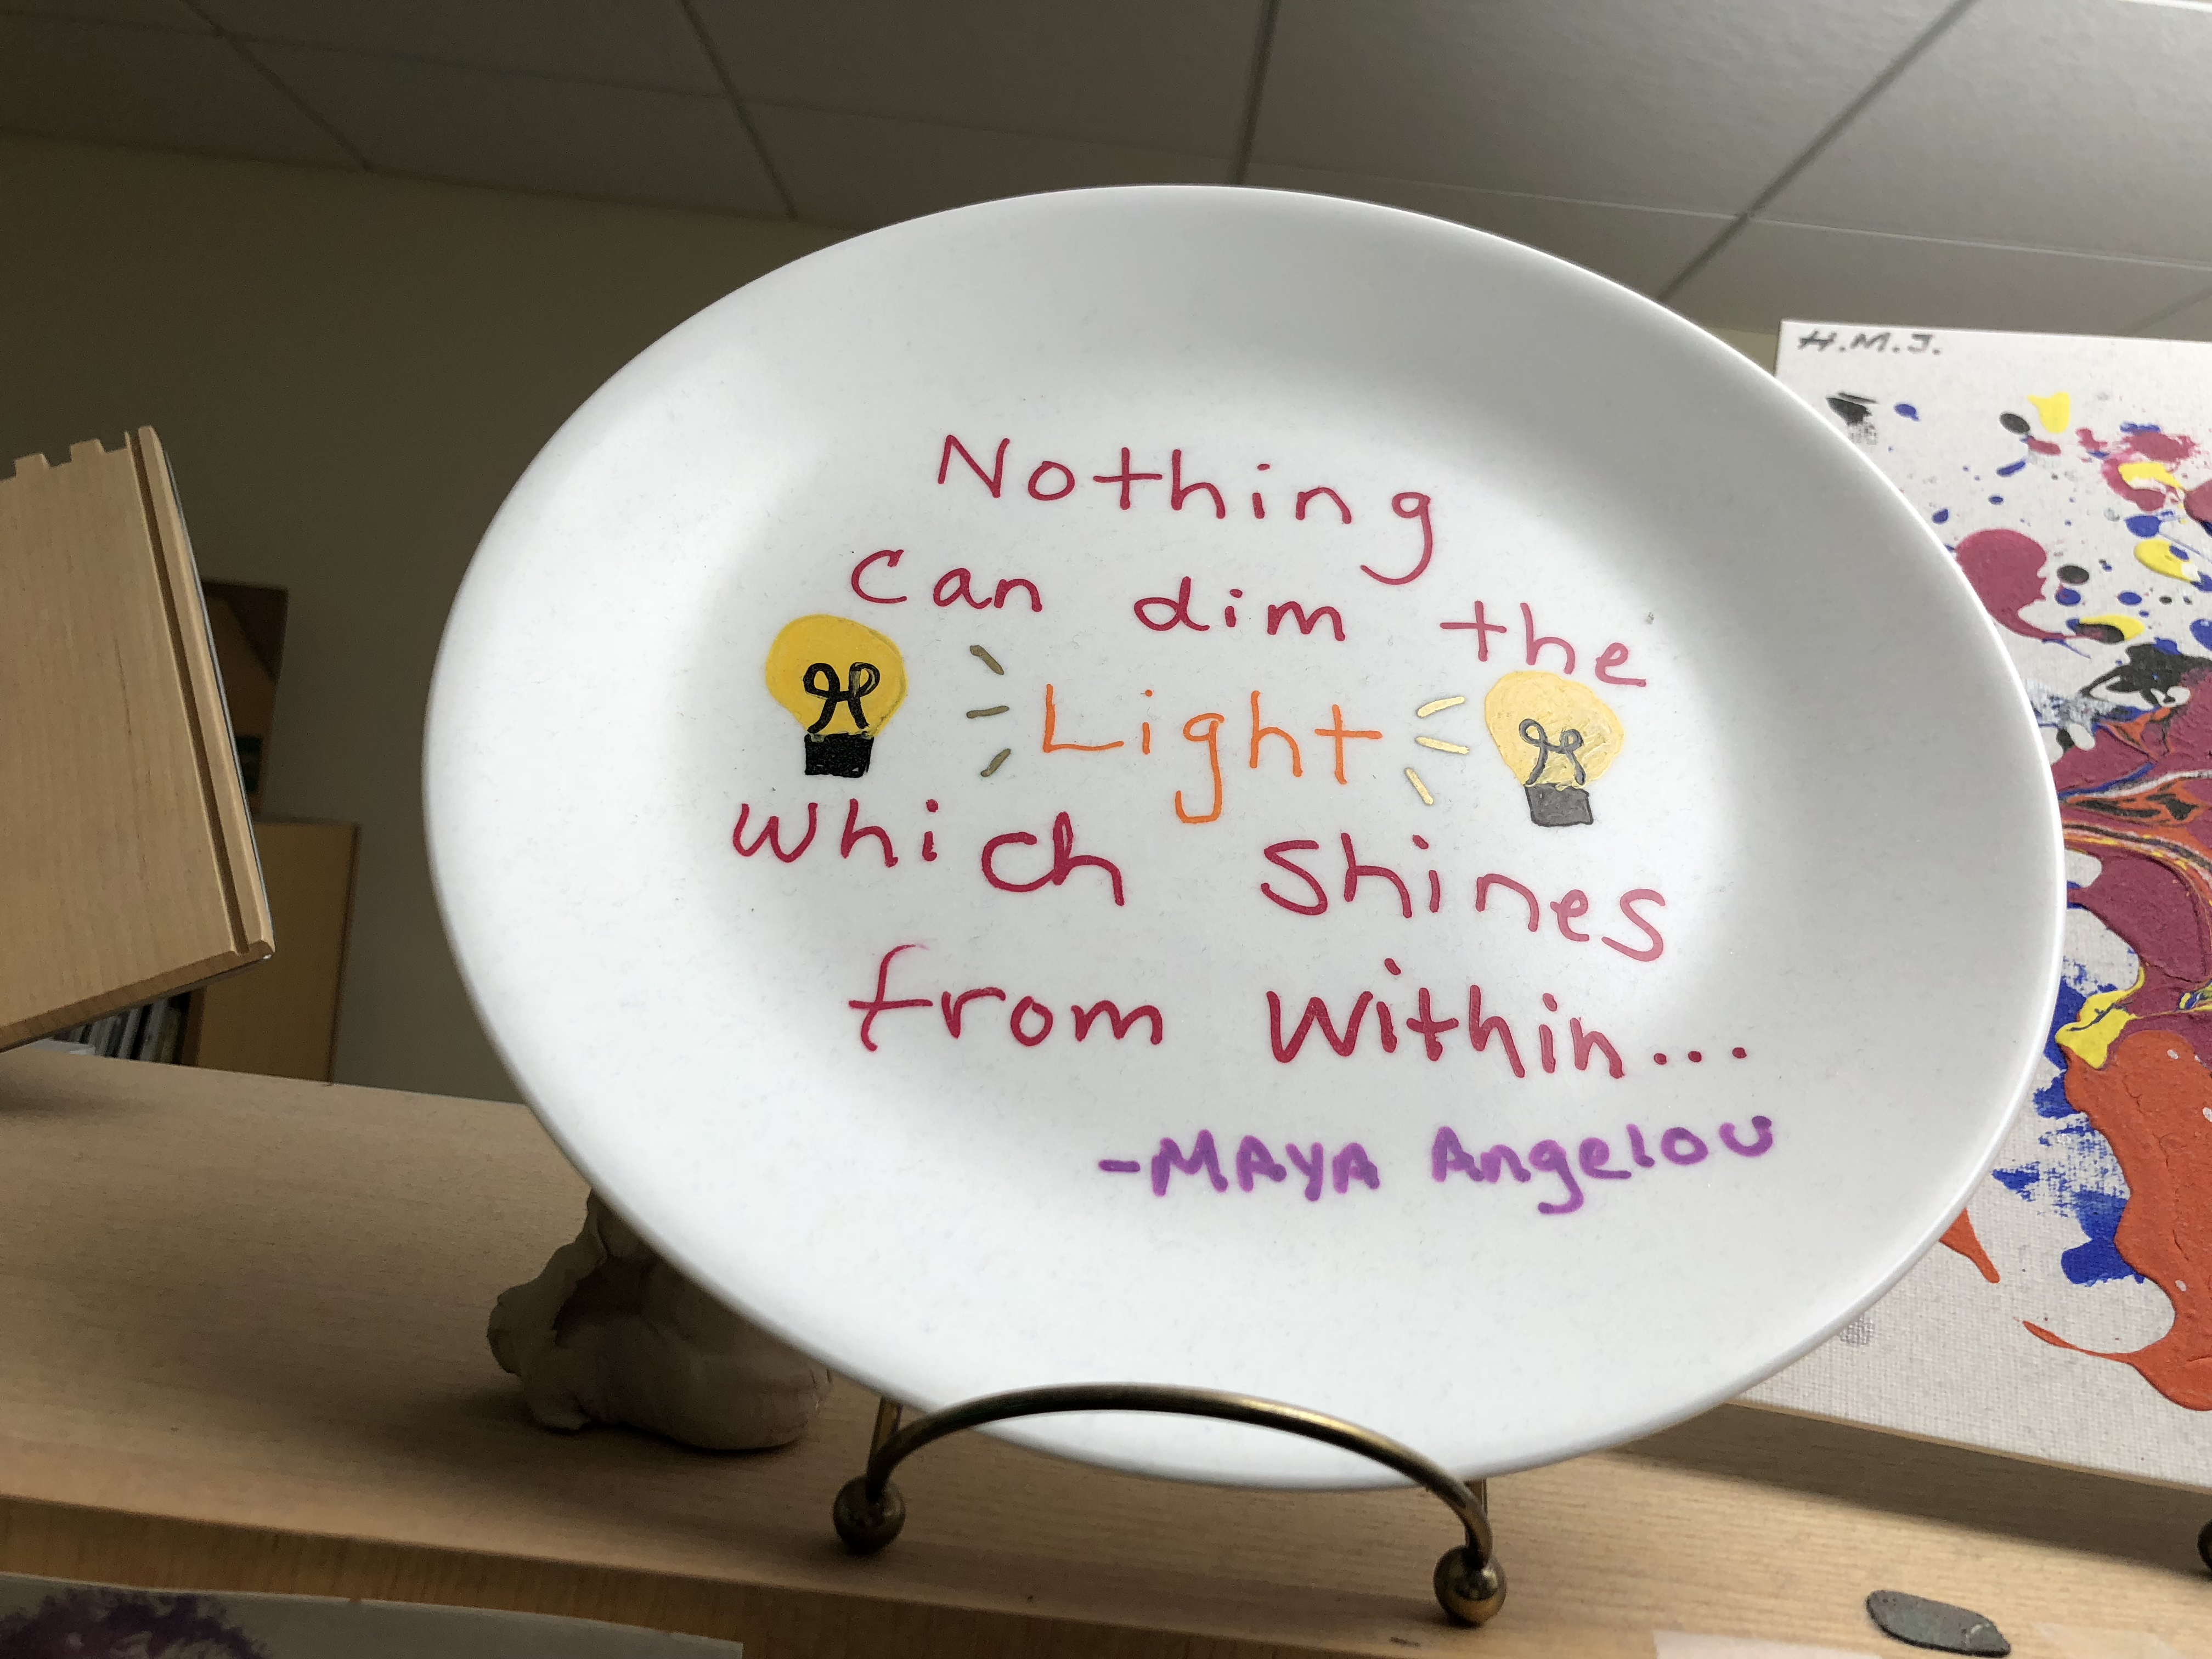 maya angelou plate on light from within